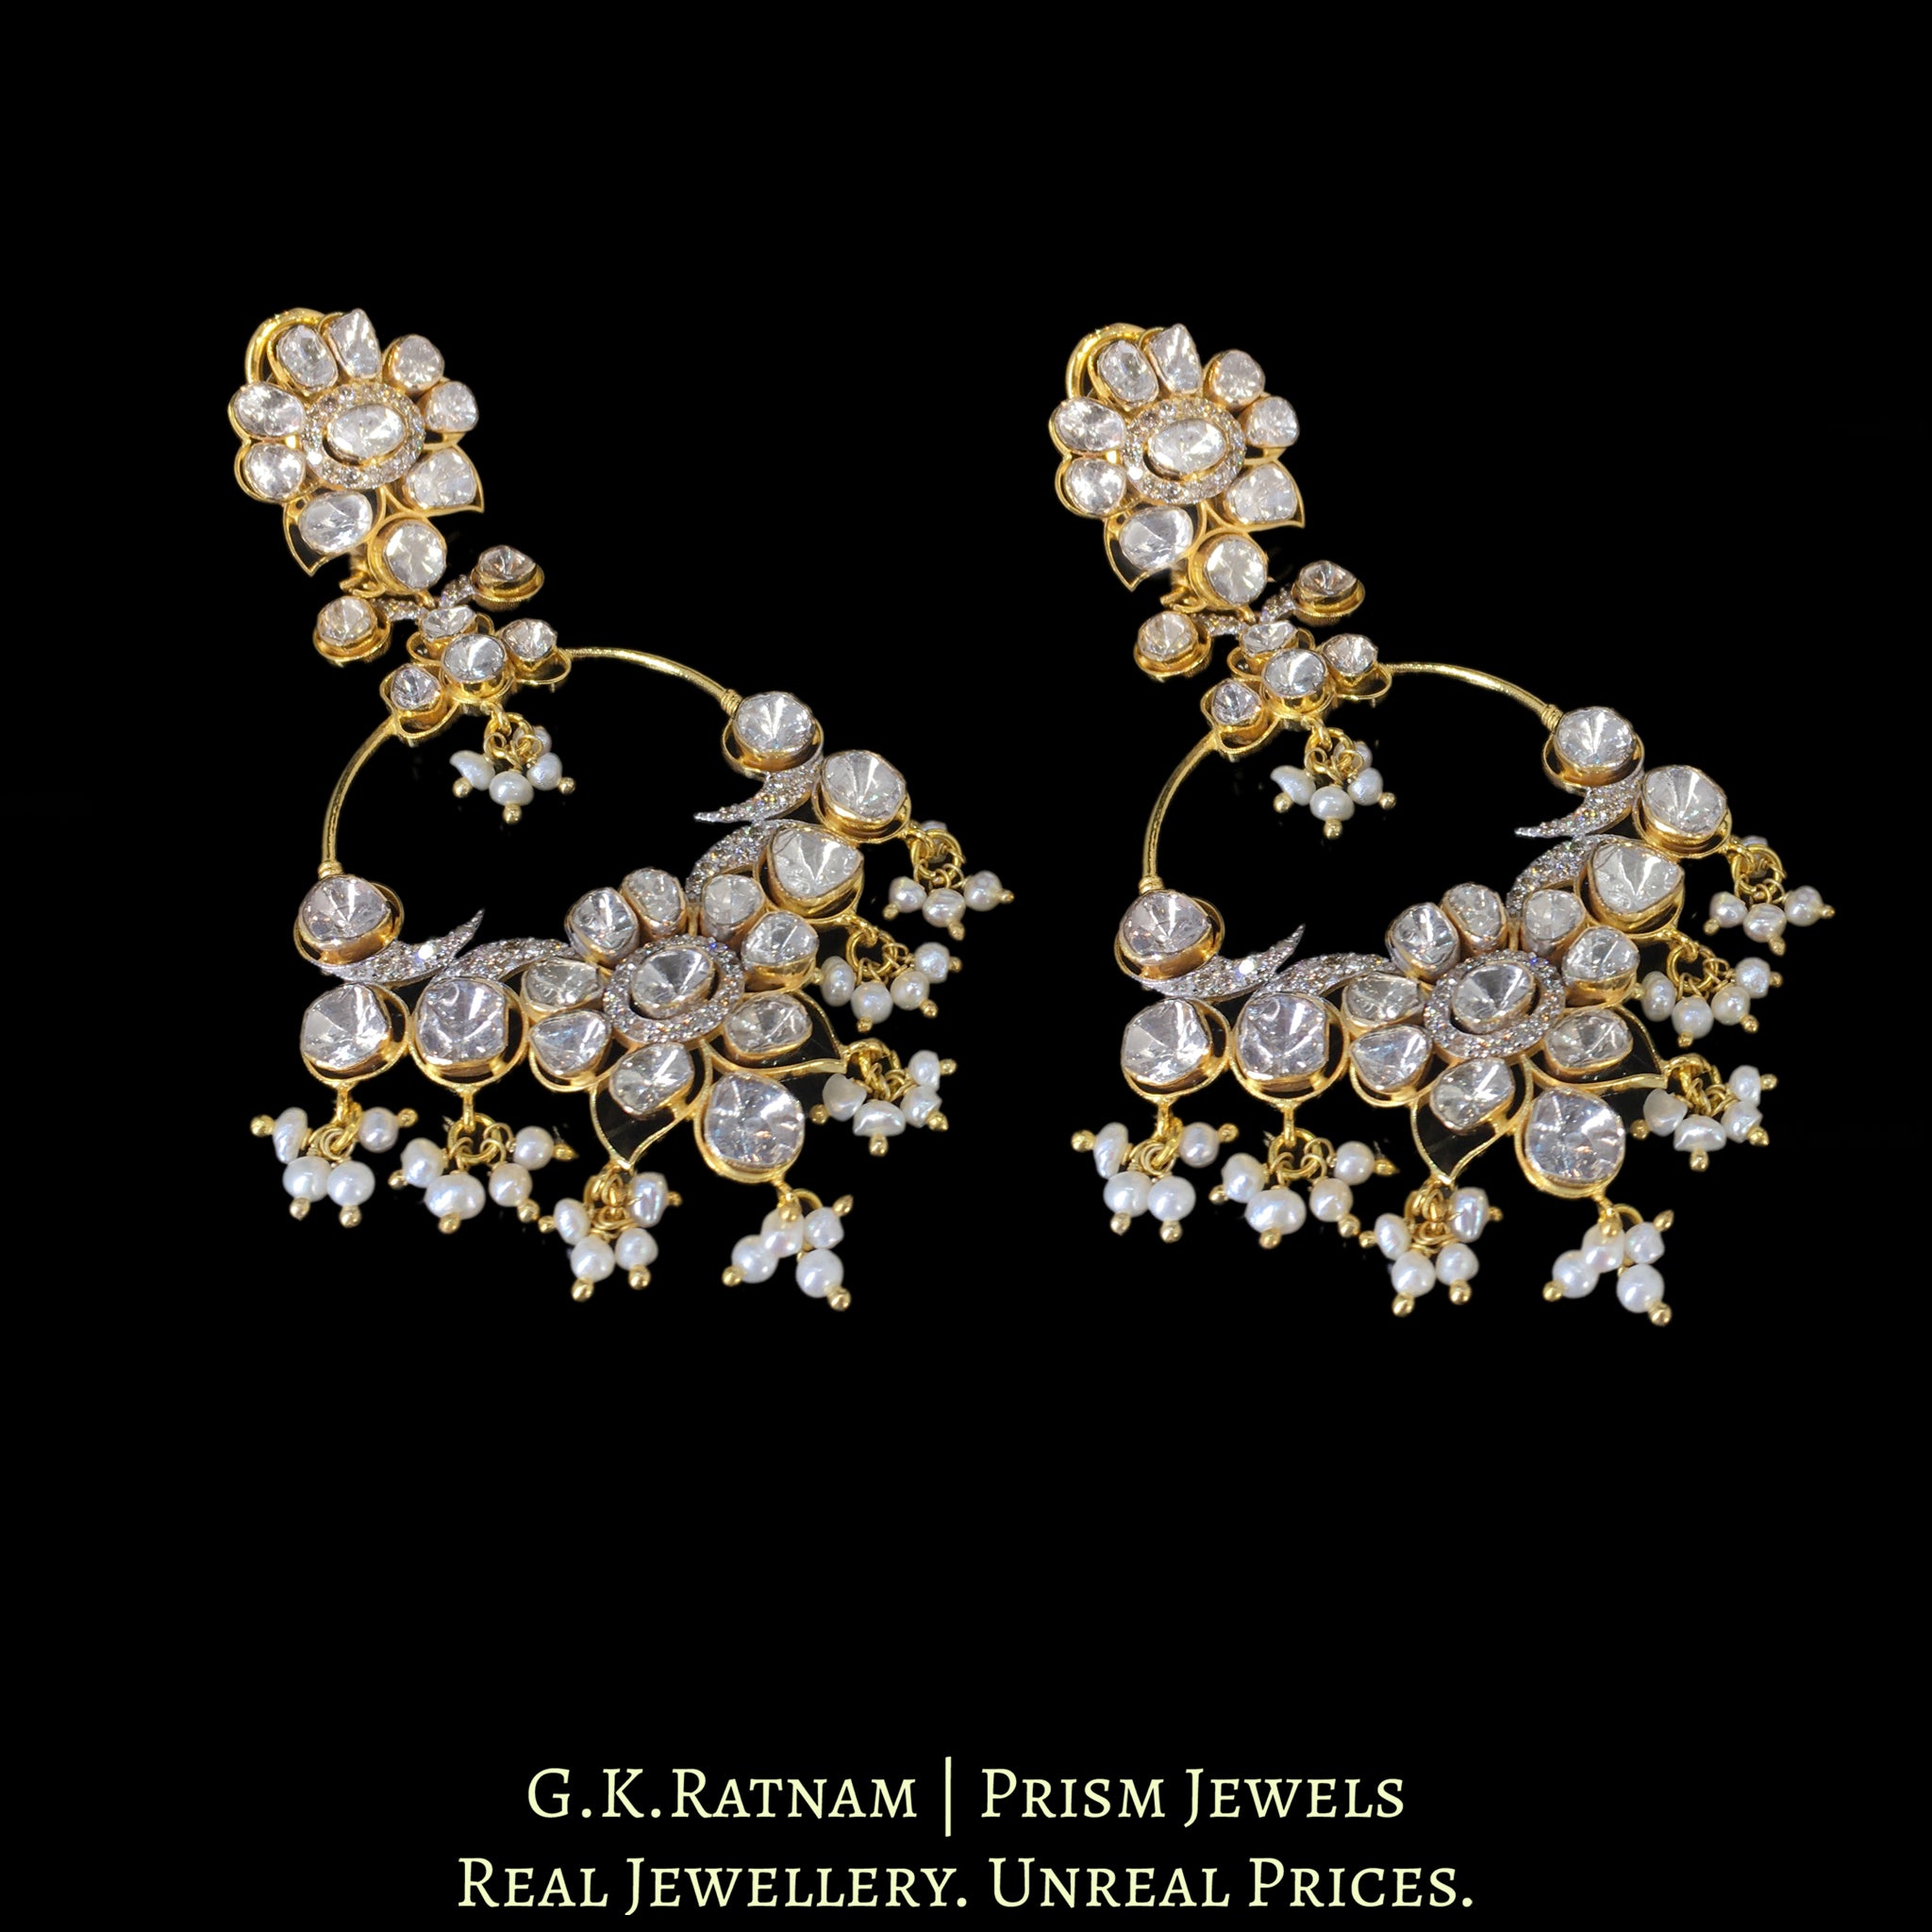 14k Gold and Diamond Polki Open Setting Chand Bali Earring Pair with Natural Freshwater Pearls